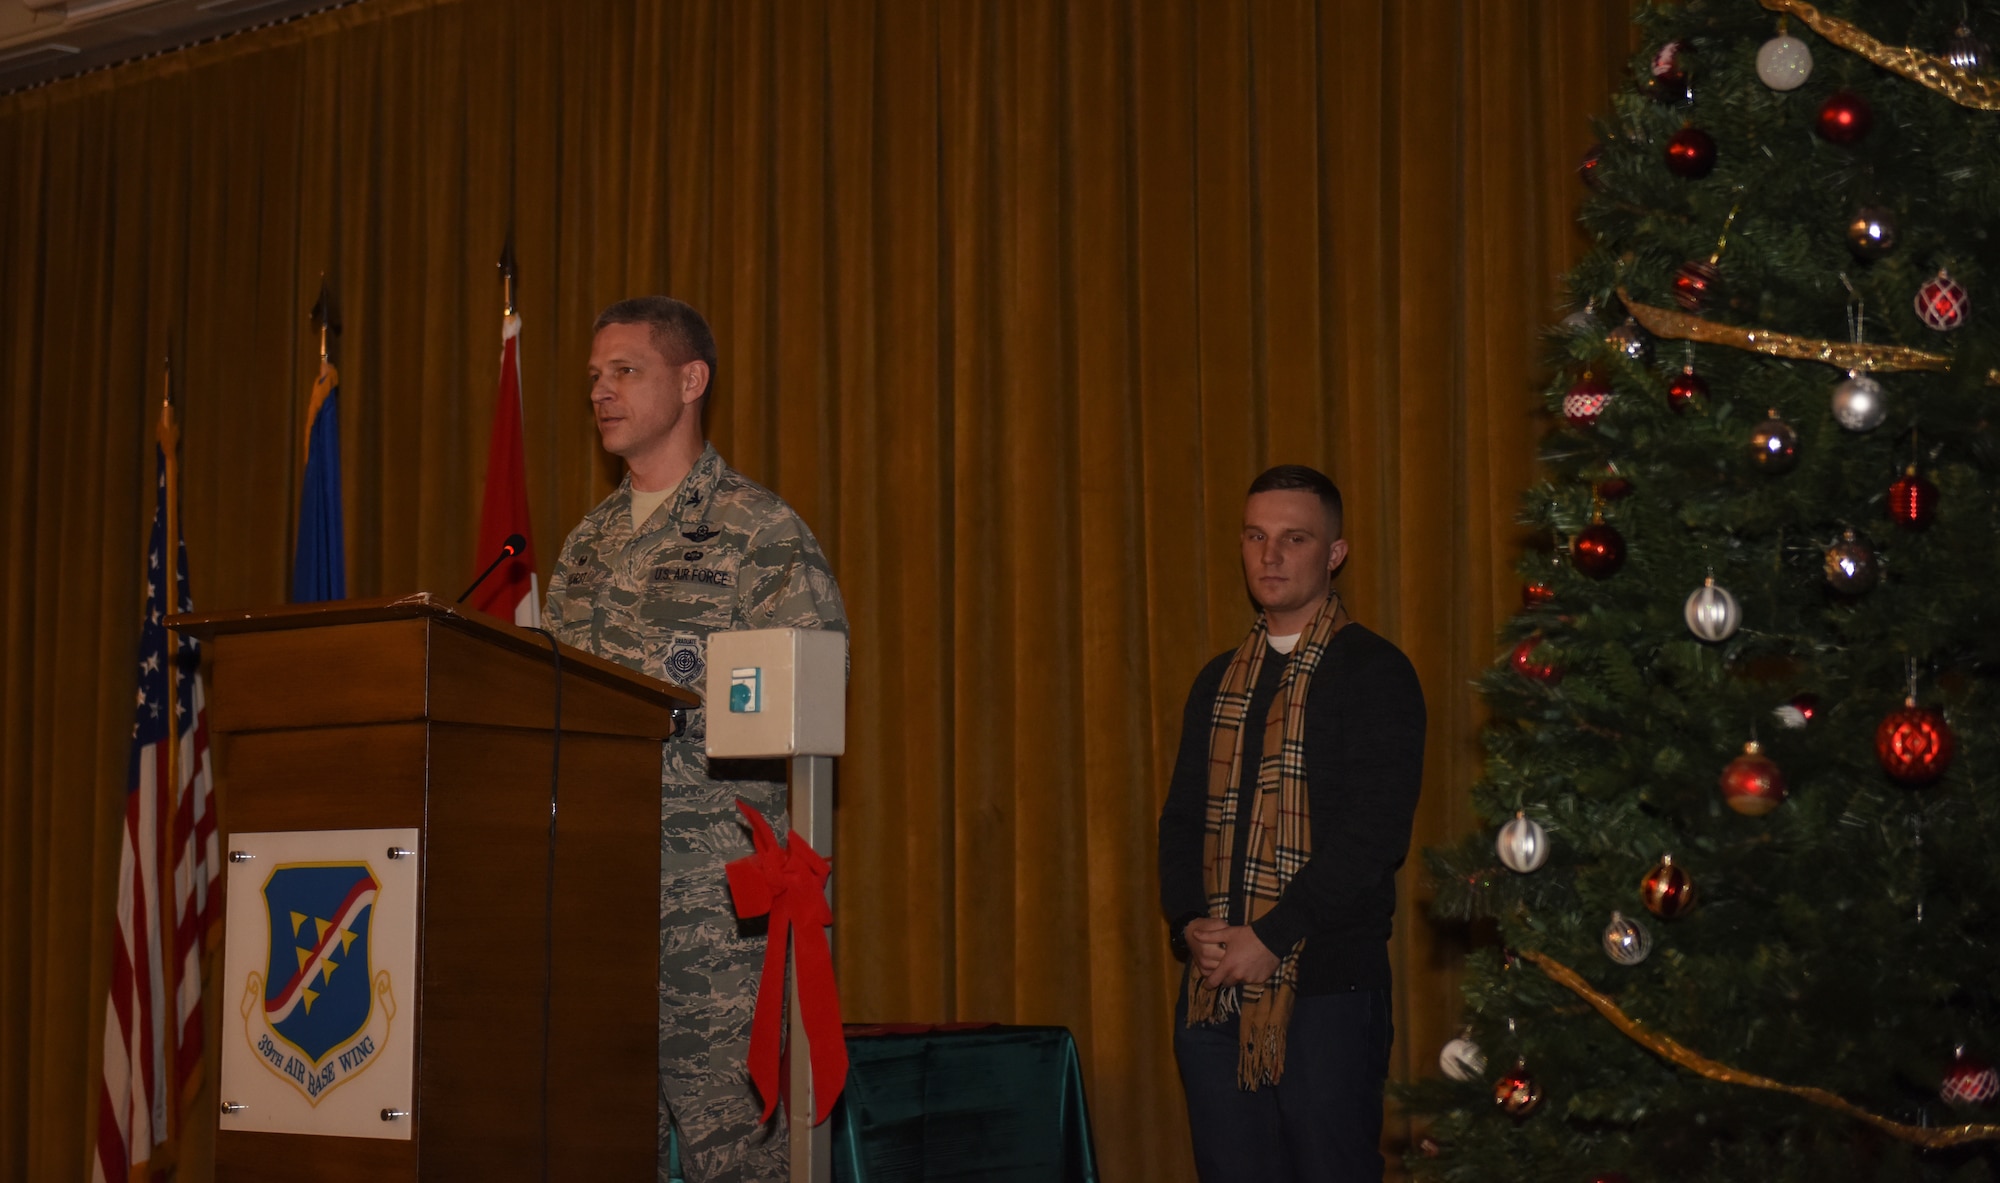 Col. Britt Hurst, 39th Air Base Wing commander, gives opening remarks during a holiday tree lighting ceremony at Incirlik Air Base, Turkey.